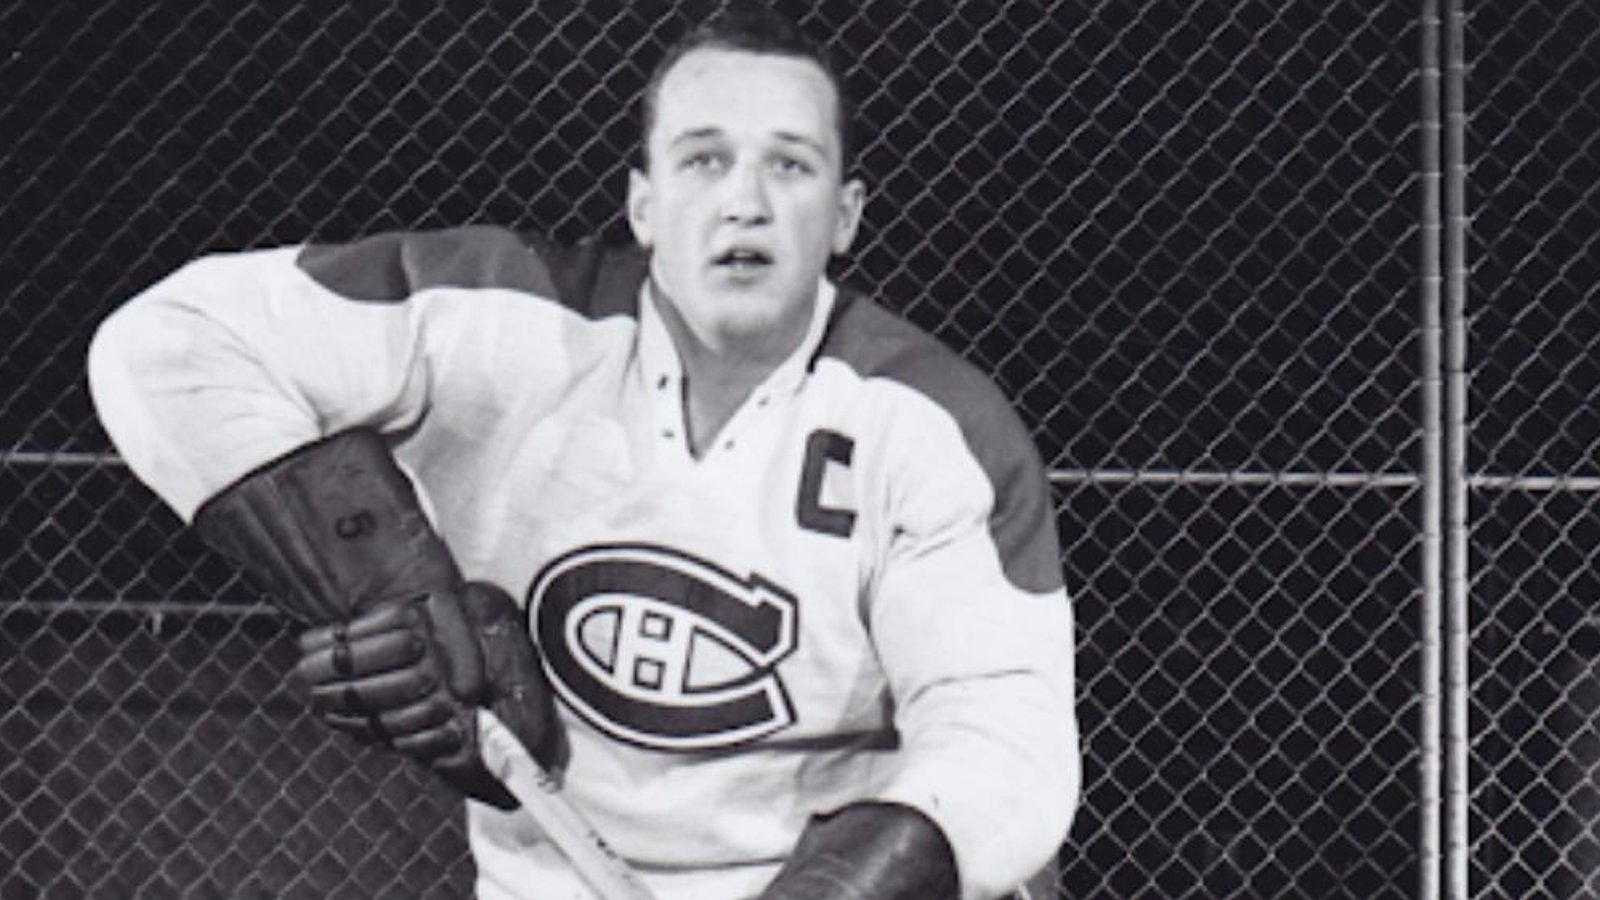 Albert “junior” Langlois, 3 time Stanley Cup champion, has died.